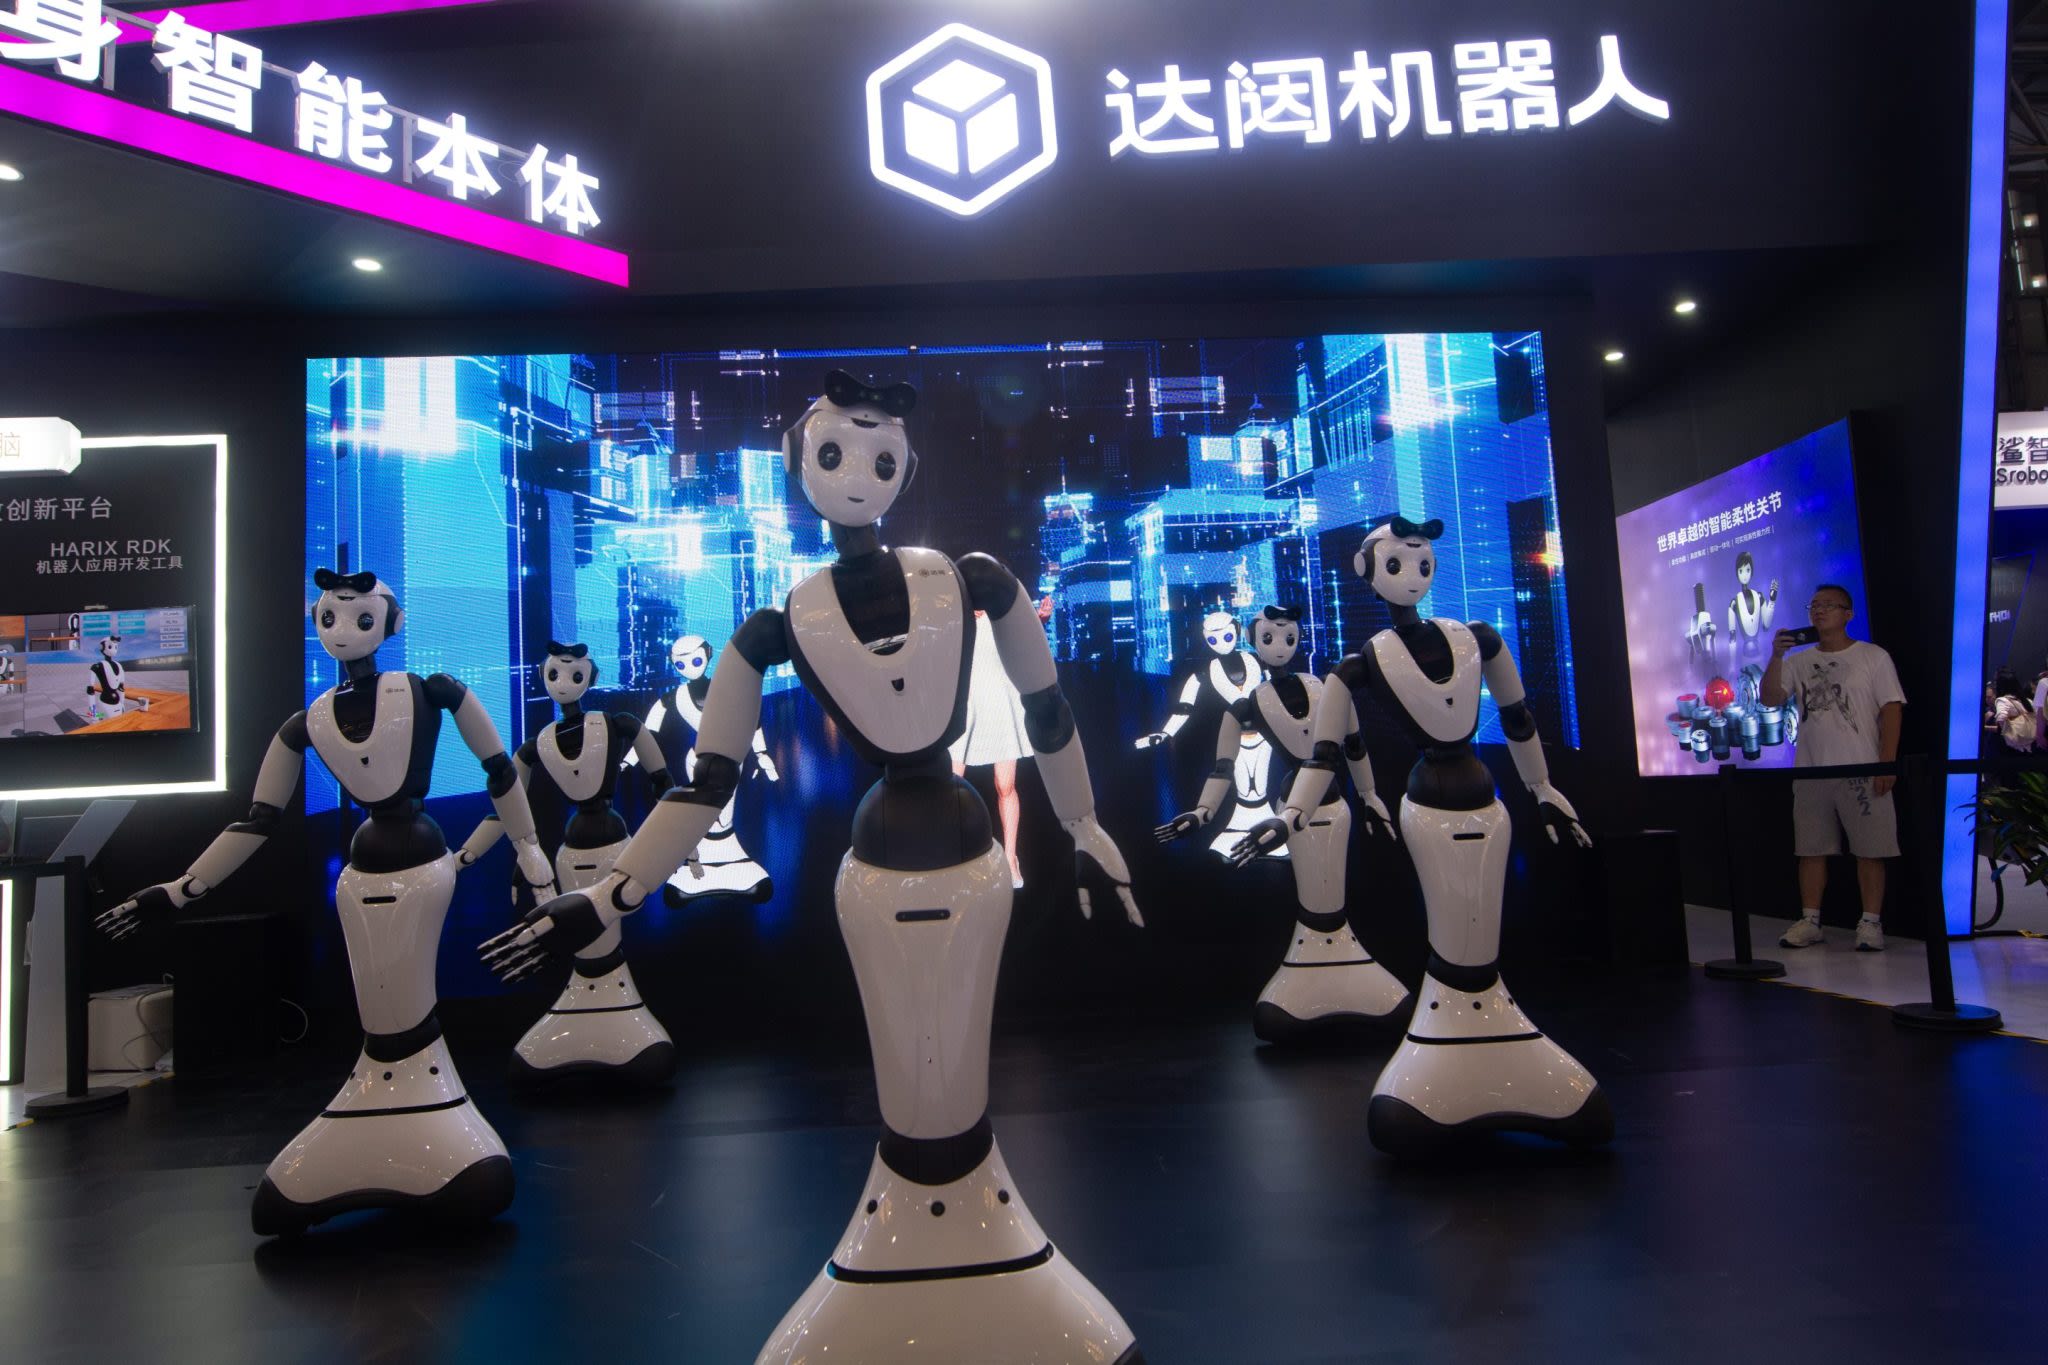 A trip to Shanghai’s AI mega-conference showed me that China’s developers are still playing catch-up to Silicon Valley